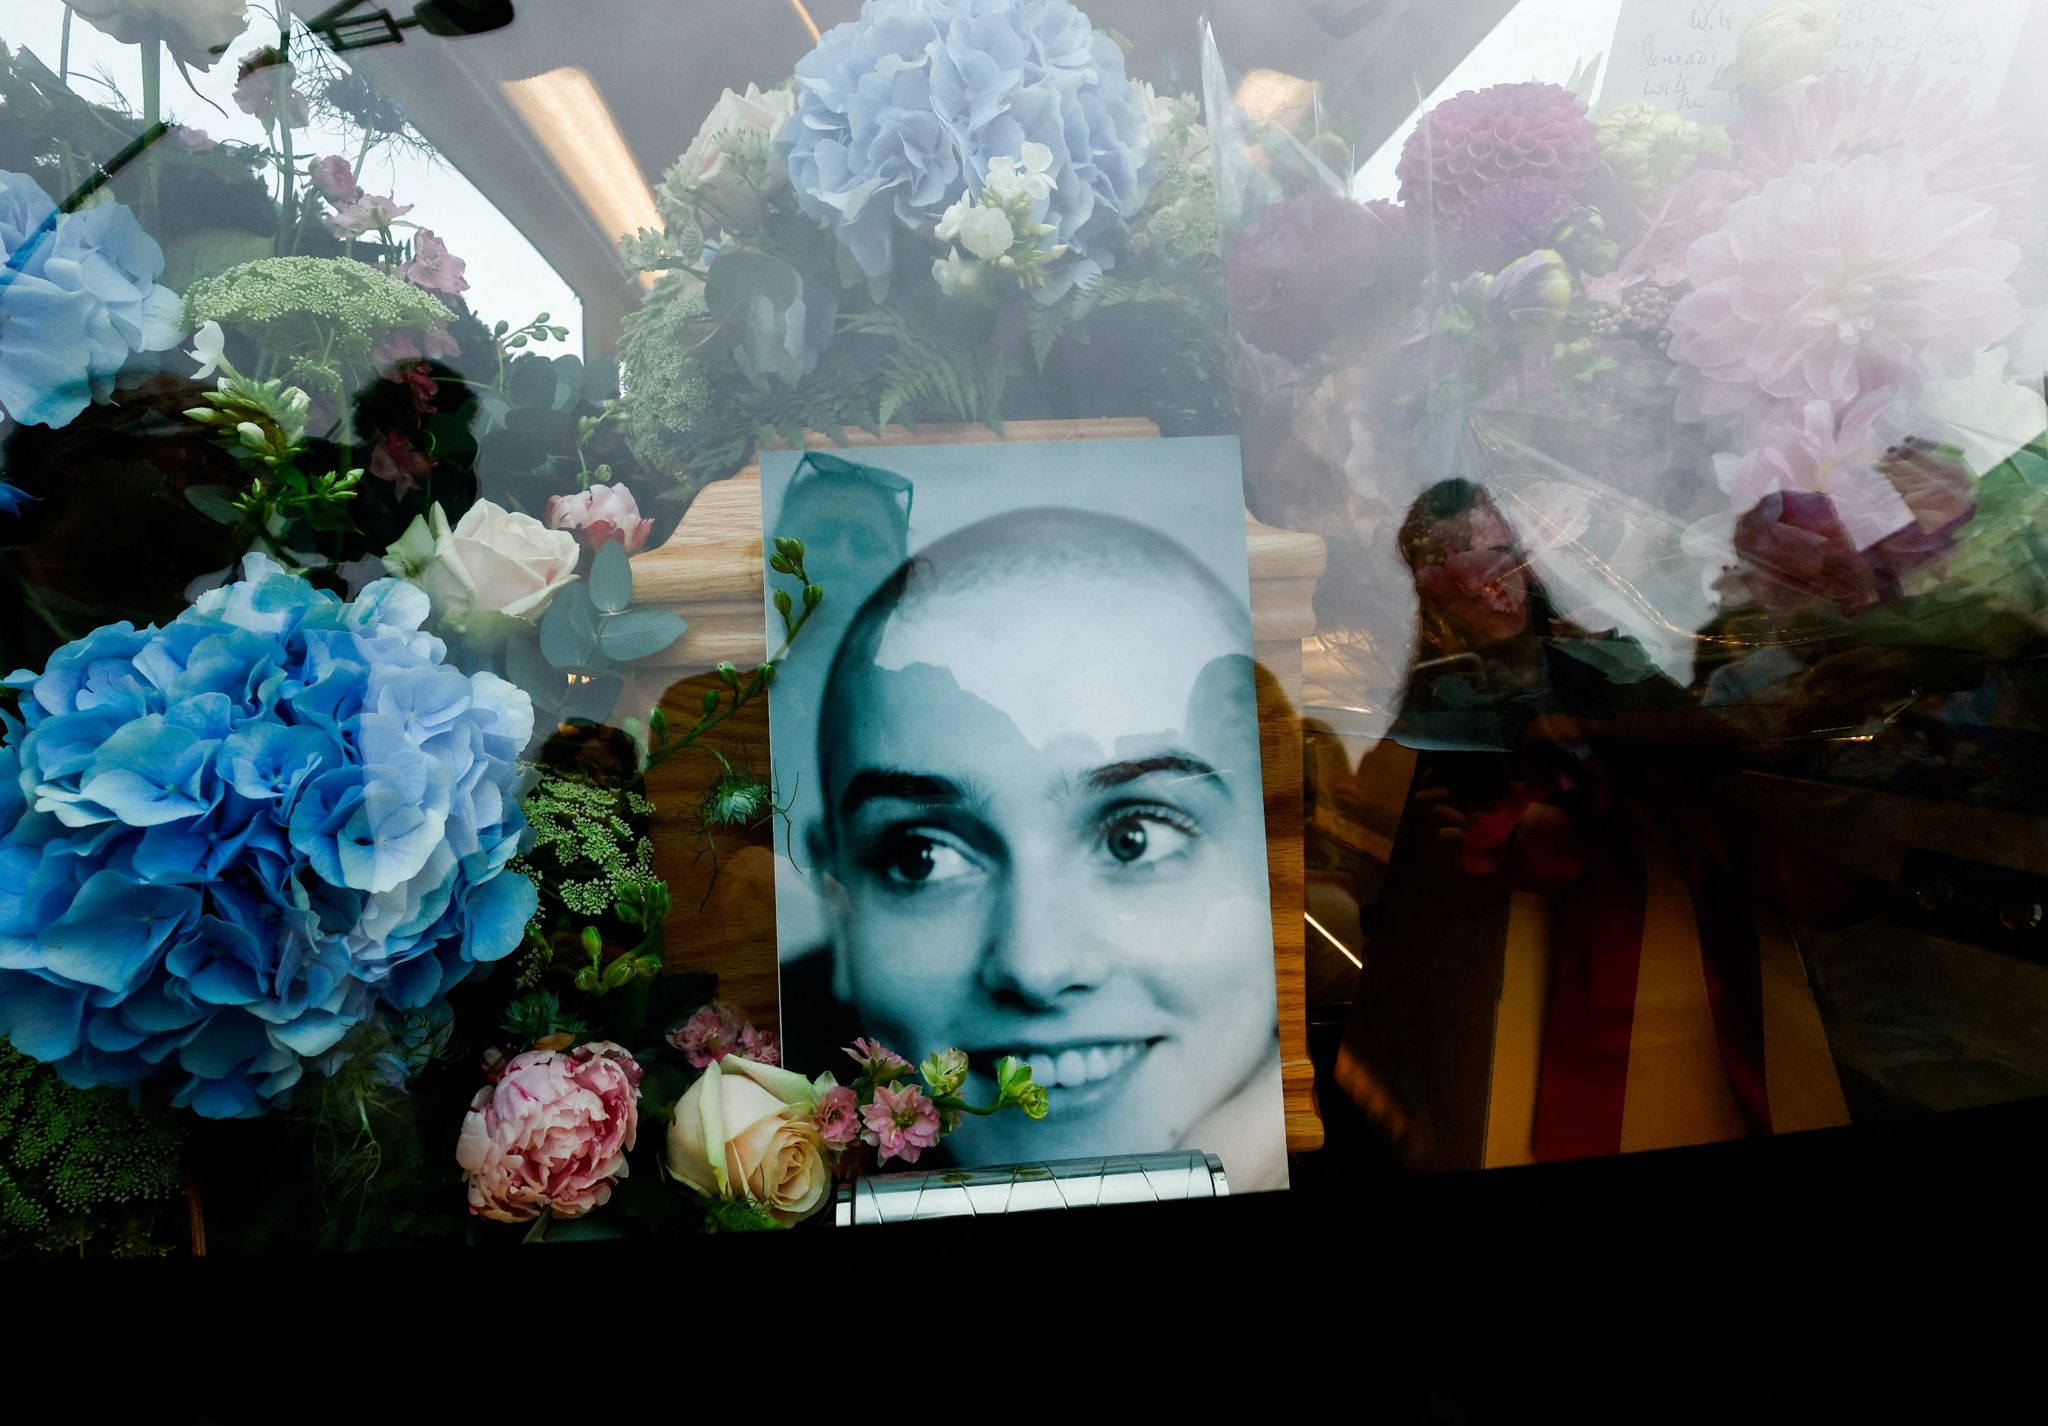 A black and white photo of a young Sinead O'Connor sits in front of her coffin, surrounded by flowers, inside a hearse